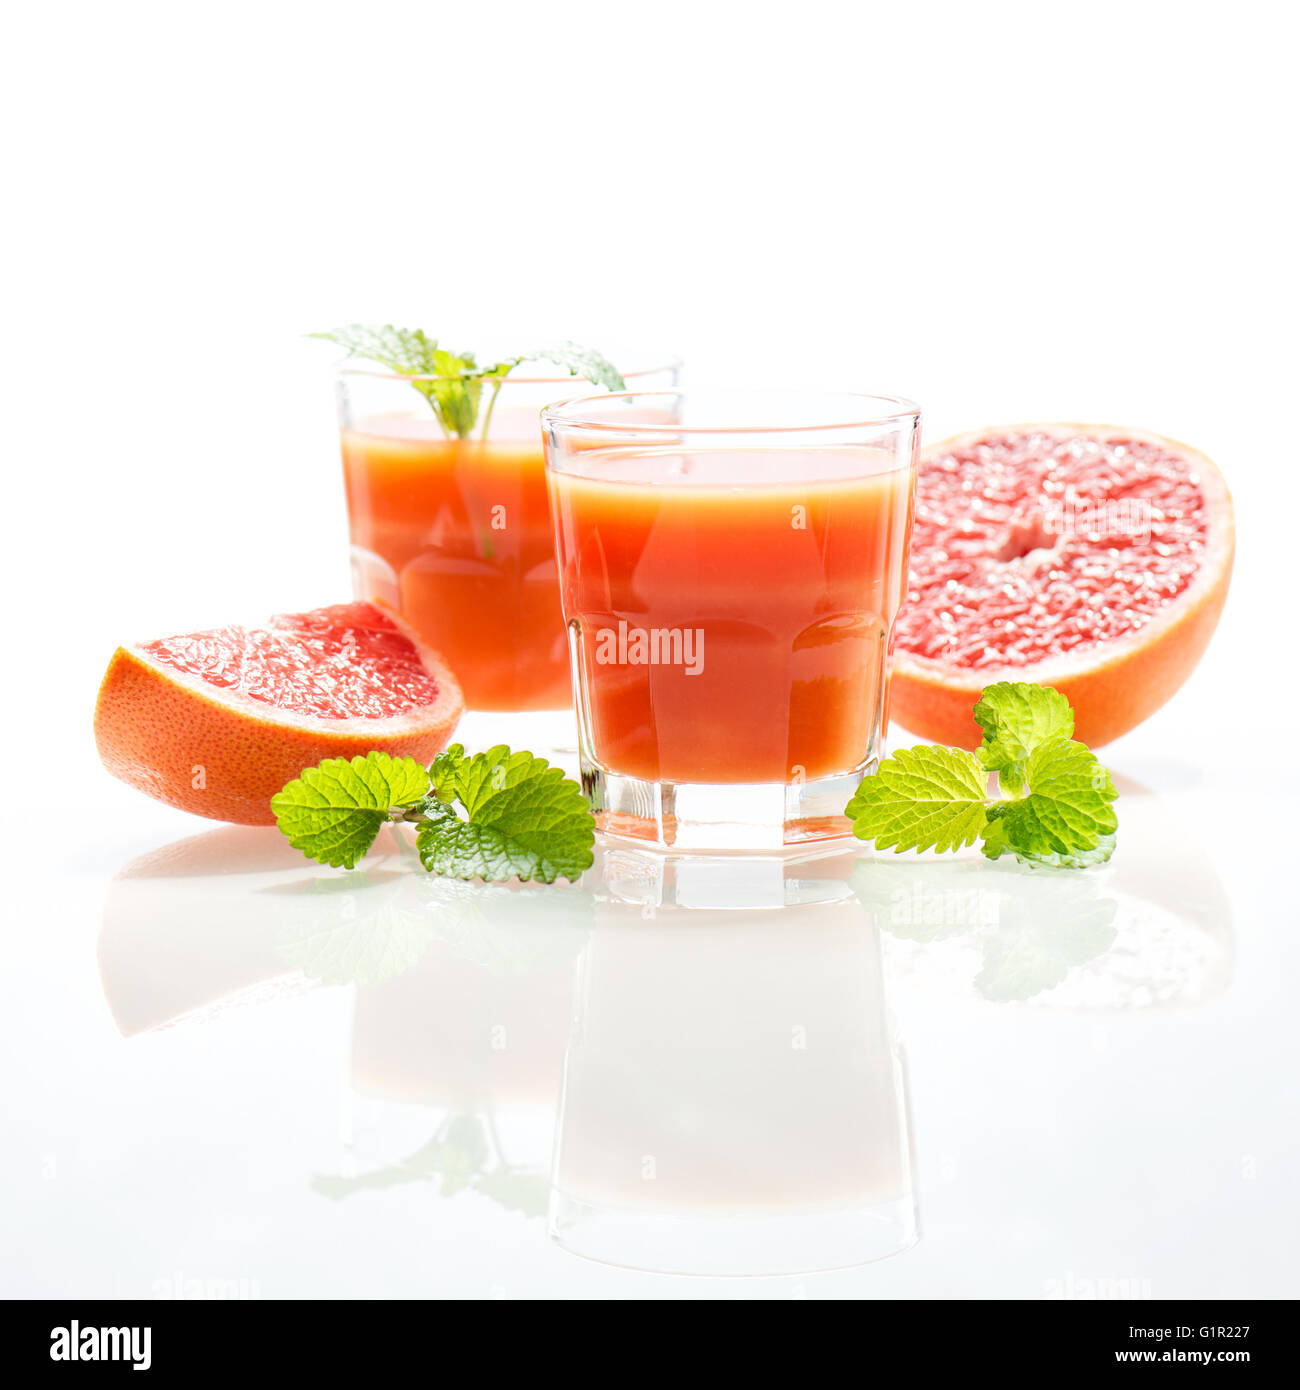 Grapefruit juice with fruits and mint leaves. High key morning light Stock Photo